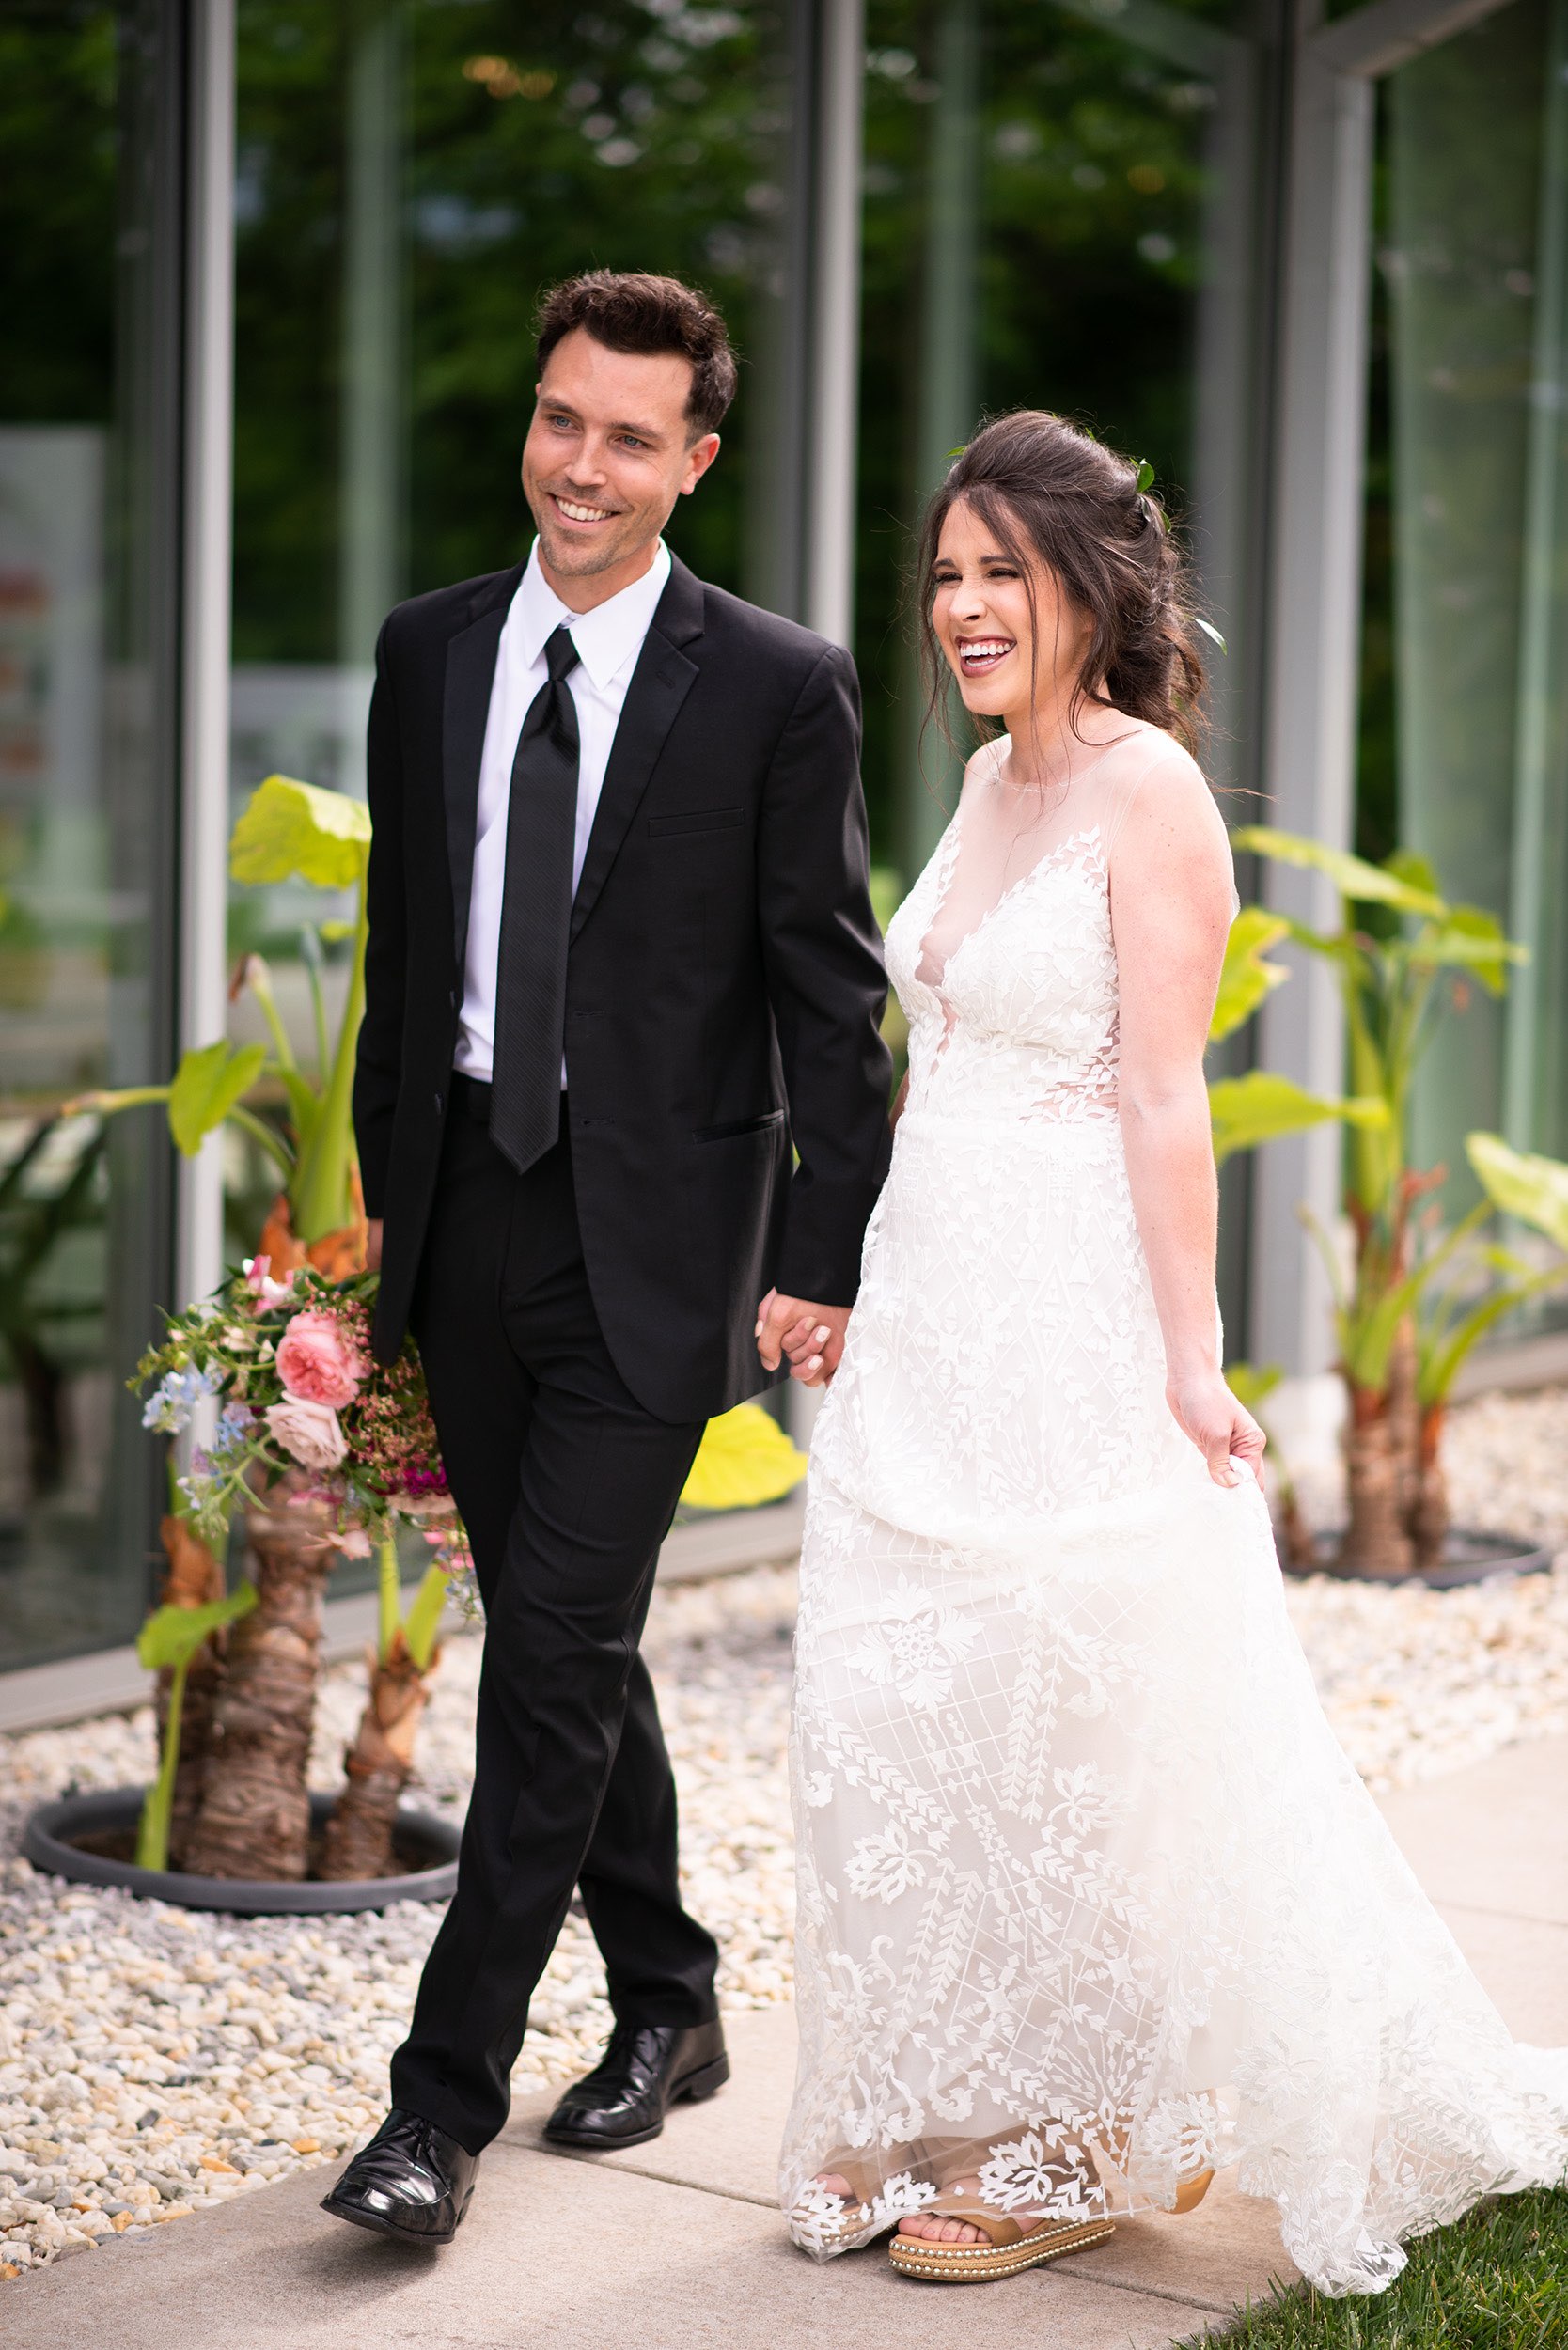 Bride and groom with brown hair walking together near Greenhouse Two Rivers venue.